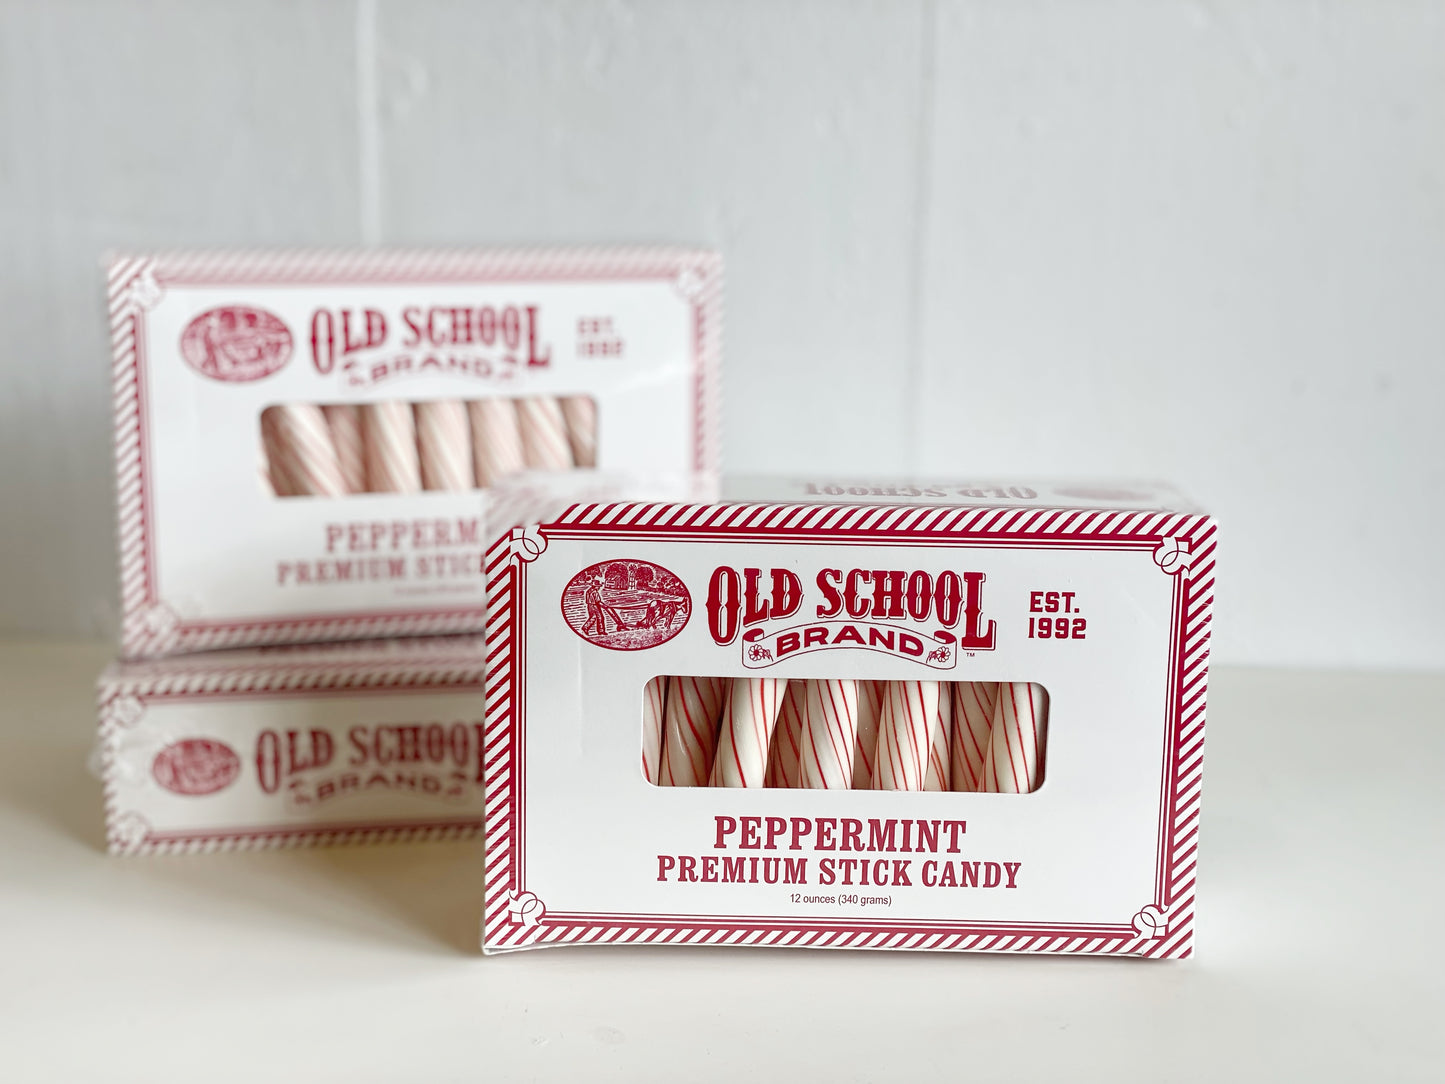 Old School Peppermint Stick Candy